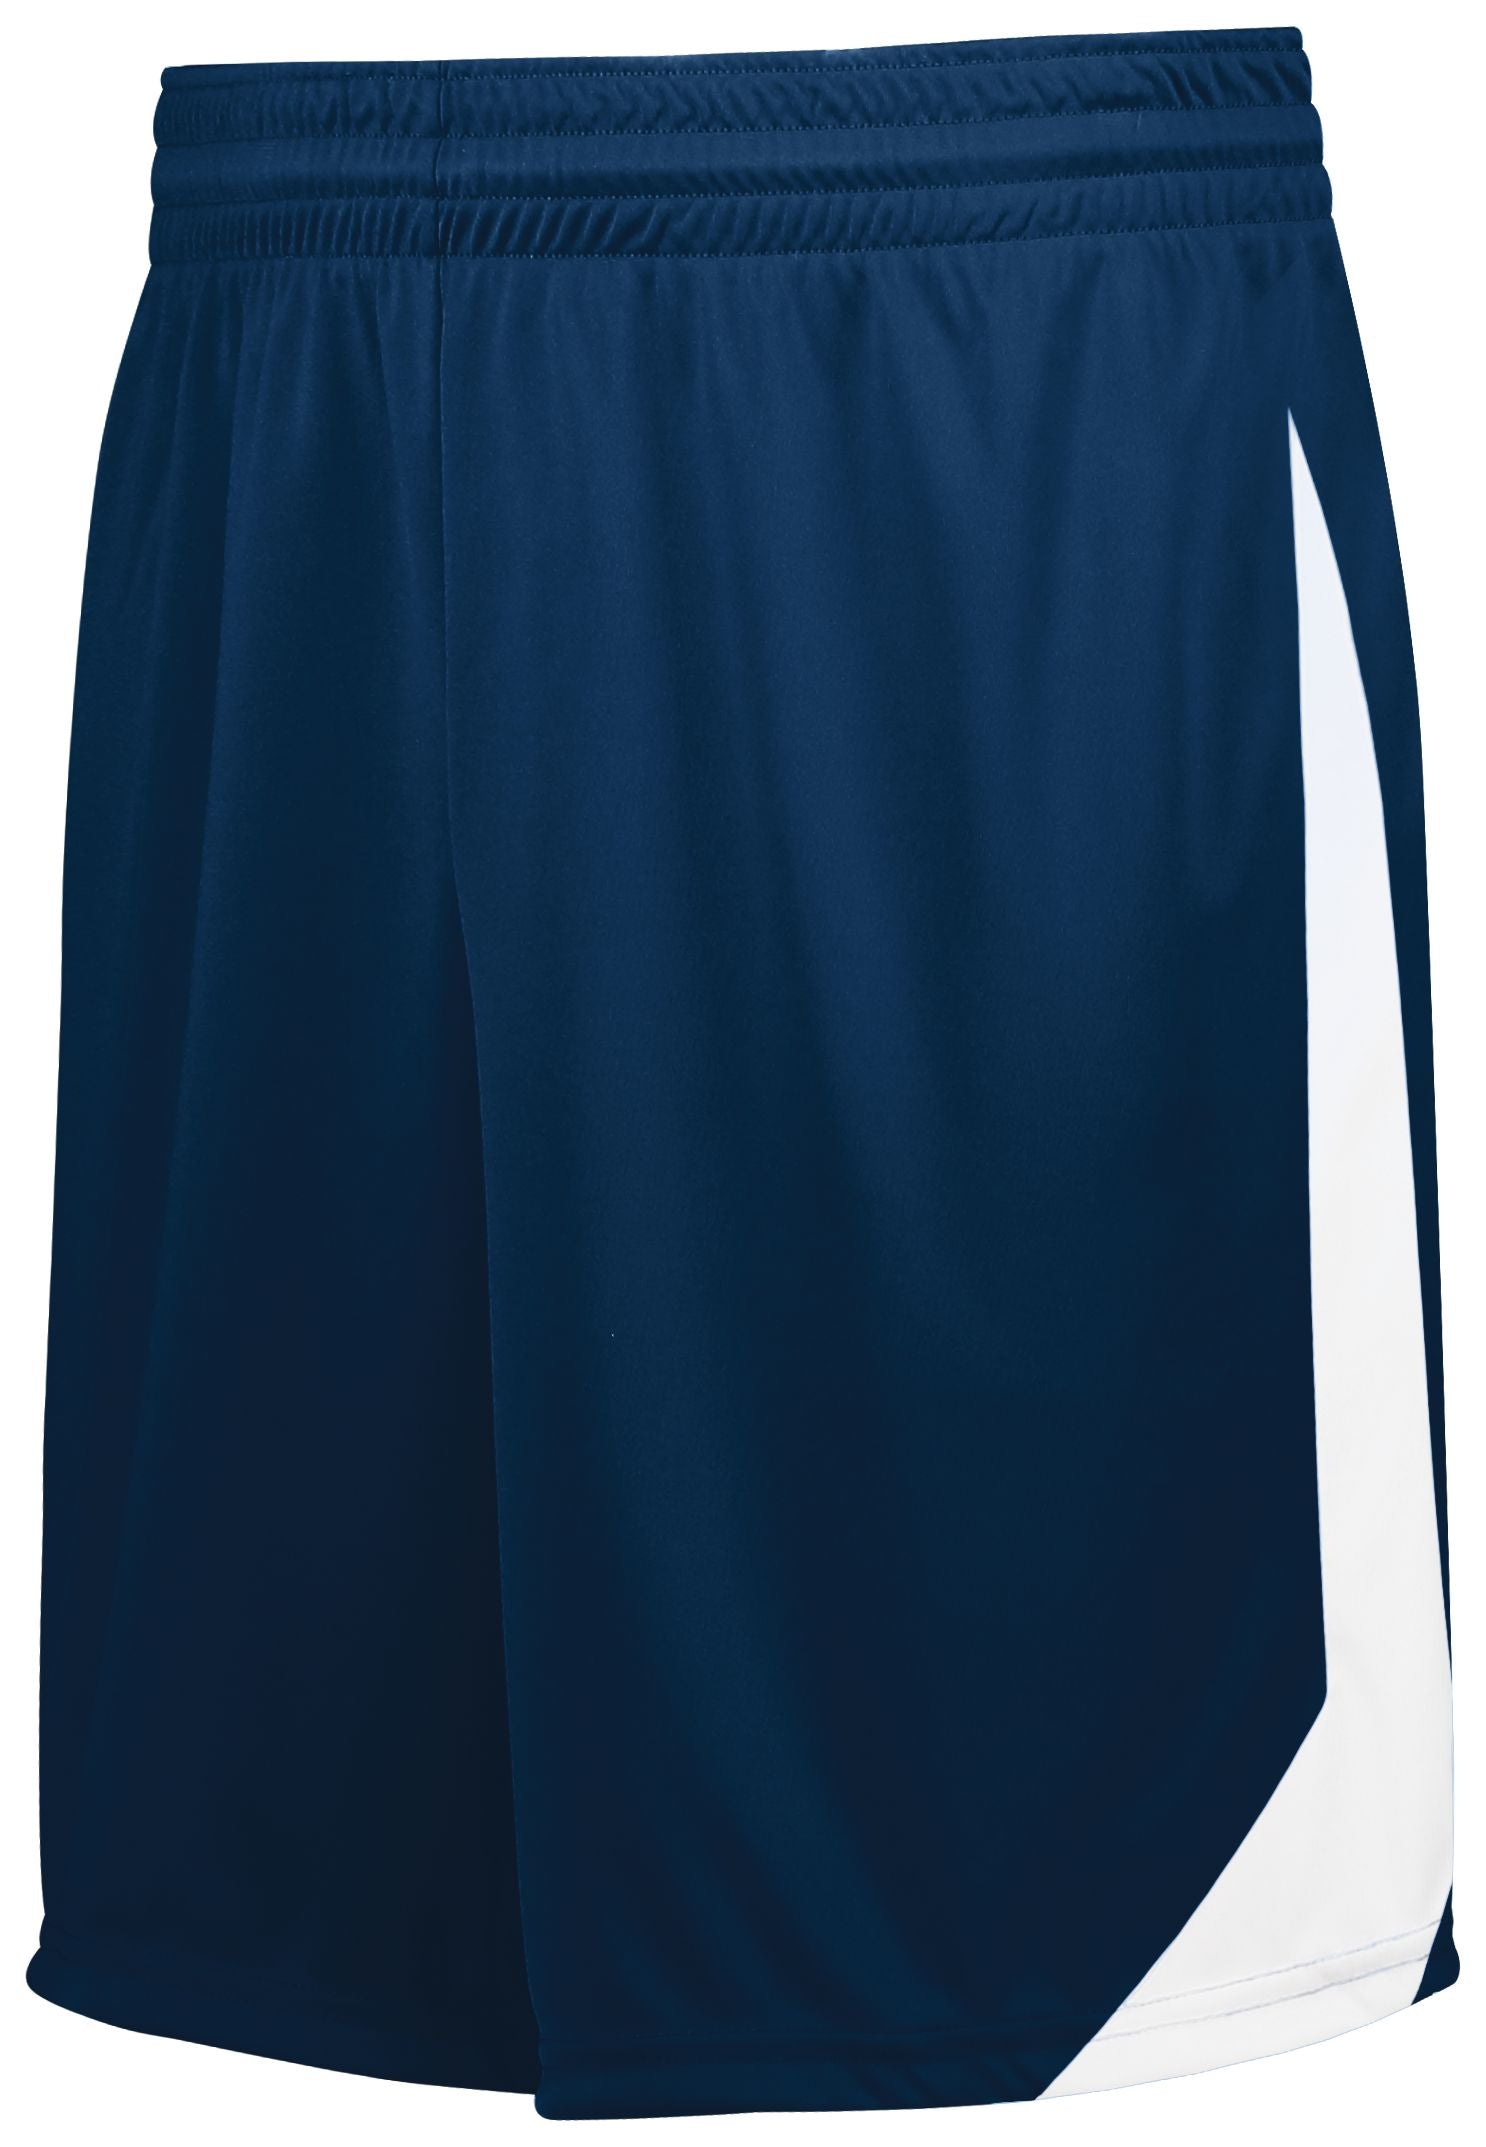 High 5 Athletico Shorts in Navy/White  -Part of the Adult, Adult-Shorts, High5-Products, Soccer, All-Sports-1 product lines at KanaleyCreations.com